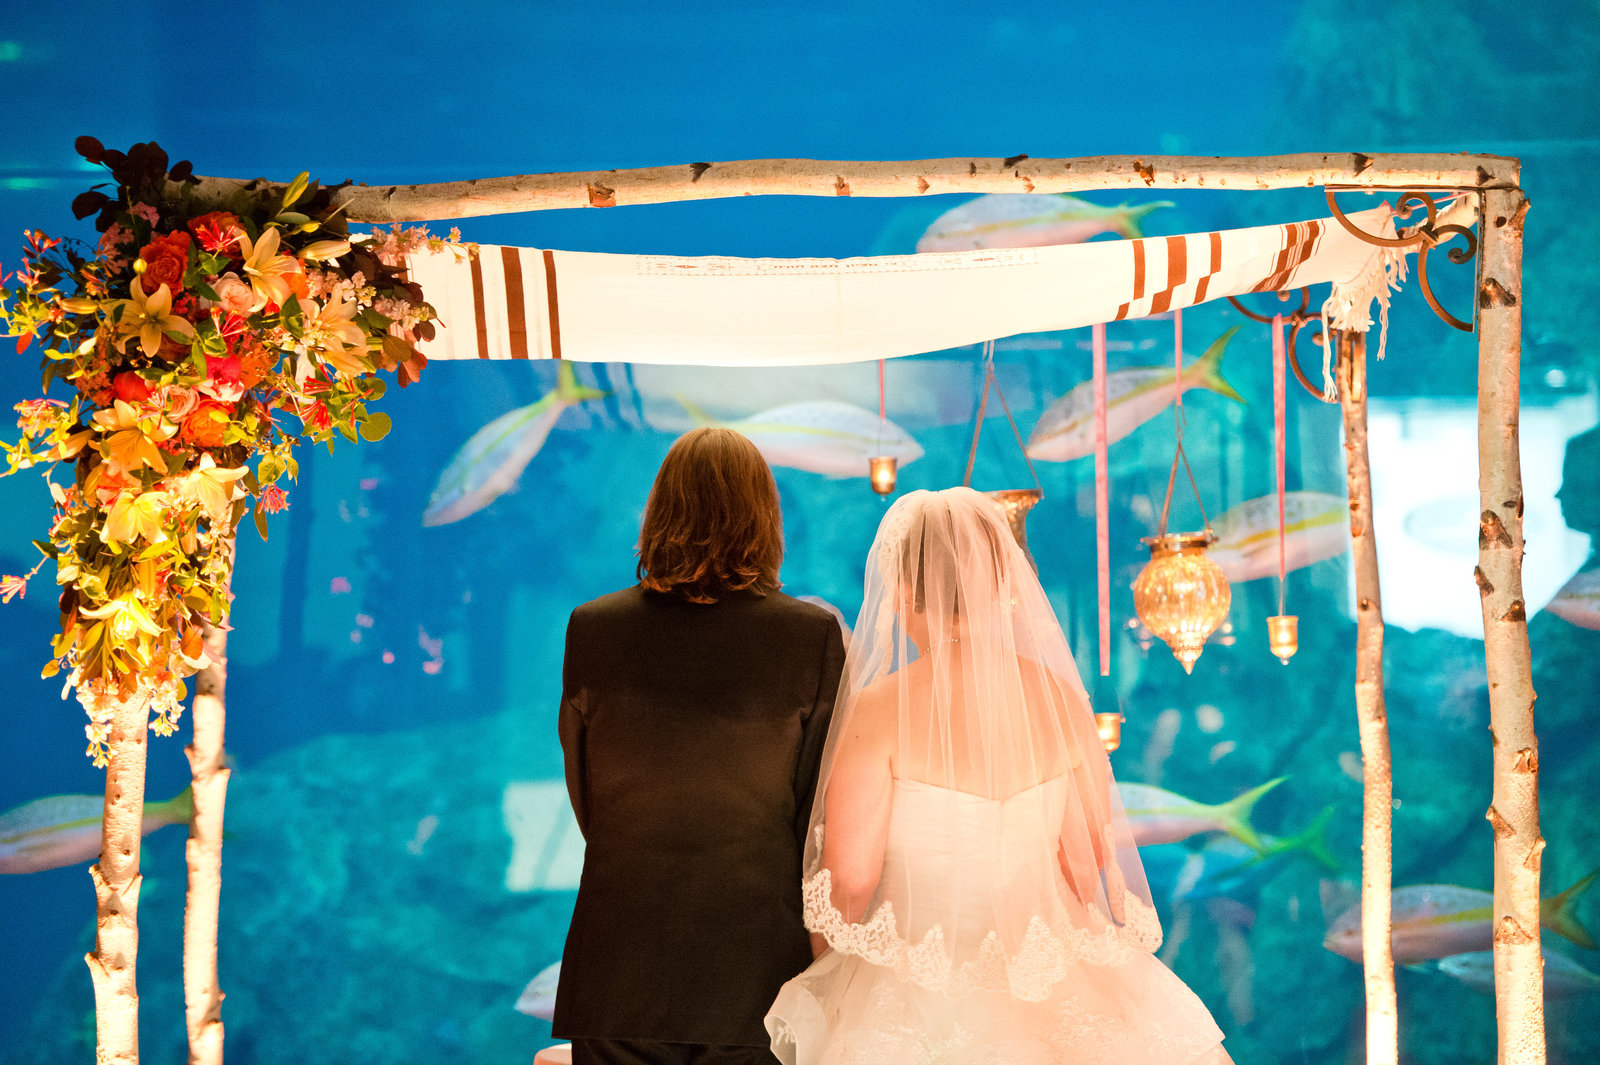 Jewish Wedding ceremony at Adventure Aquarium in Camden New Jersey. Wedding in Currents Ballroom. Chuppah design by A Garden Party in Elmer, NJ photo by Amanda Young Photography